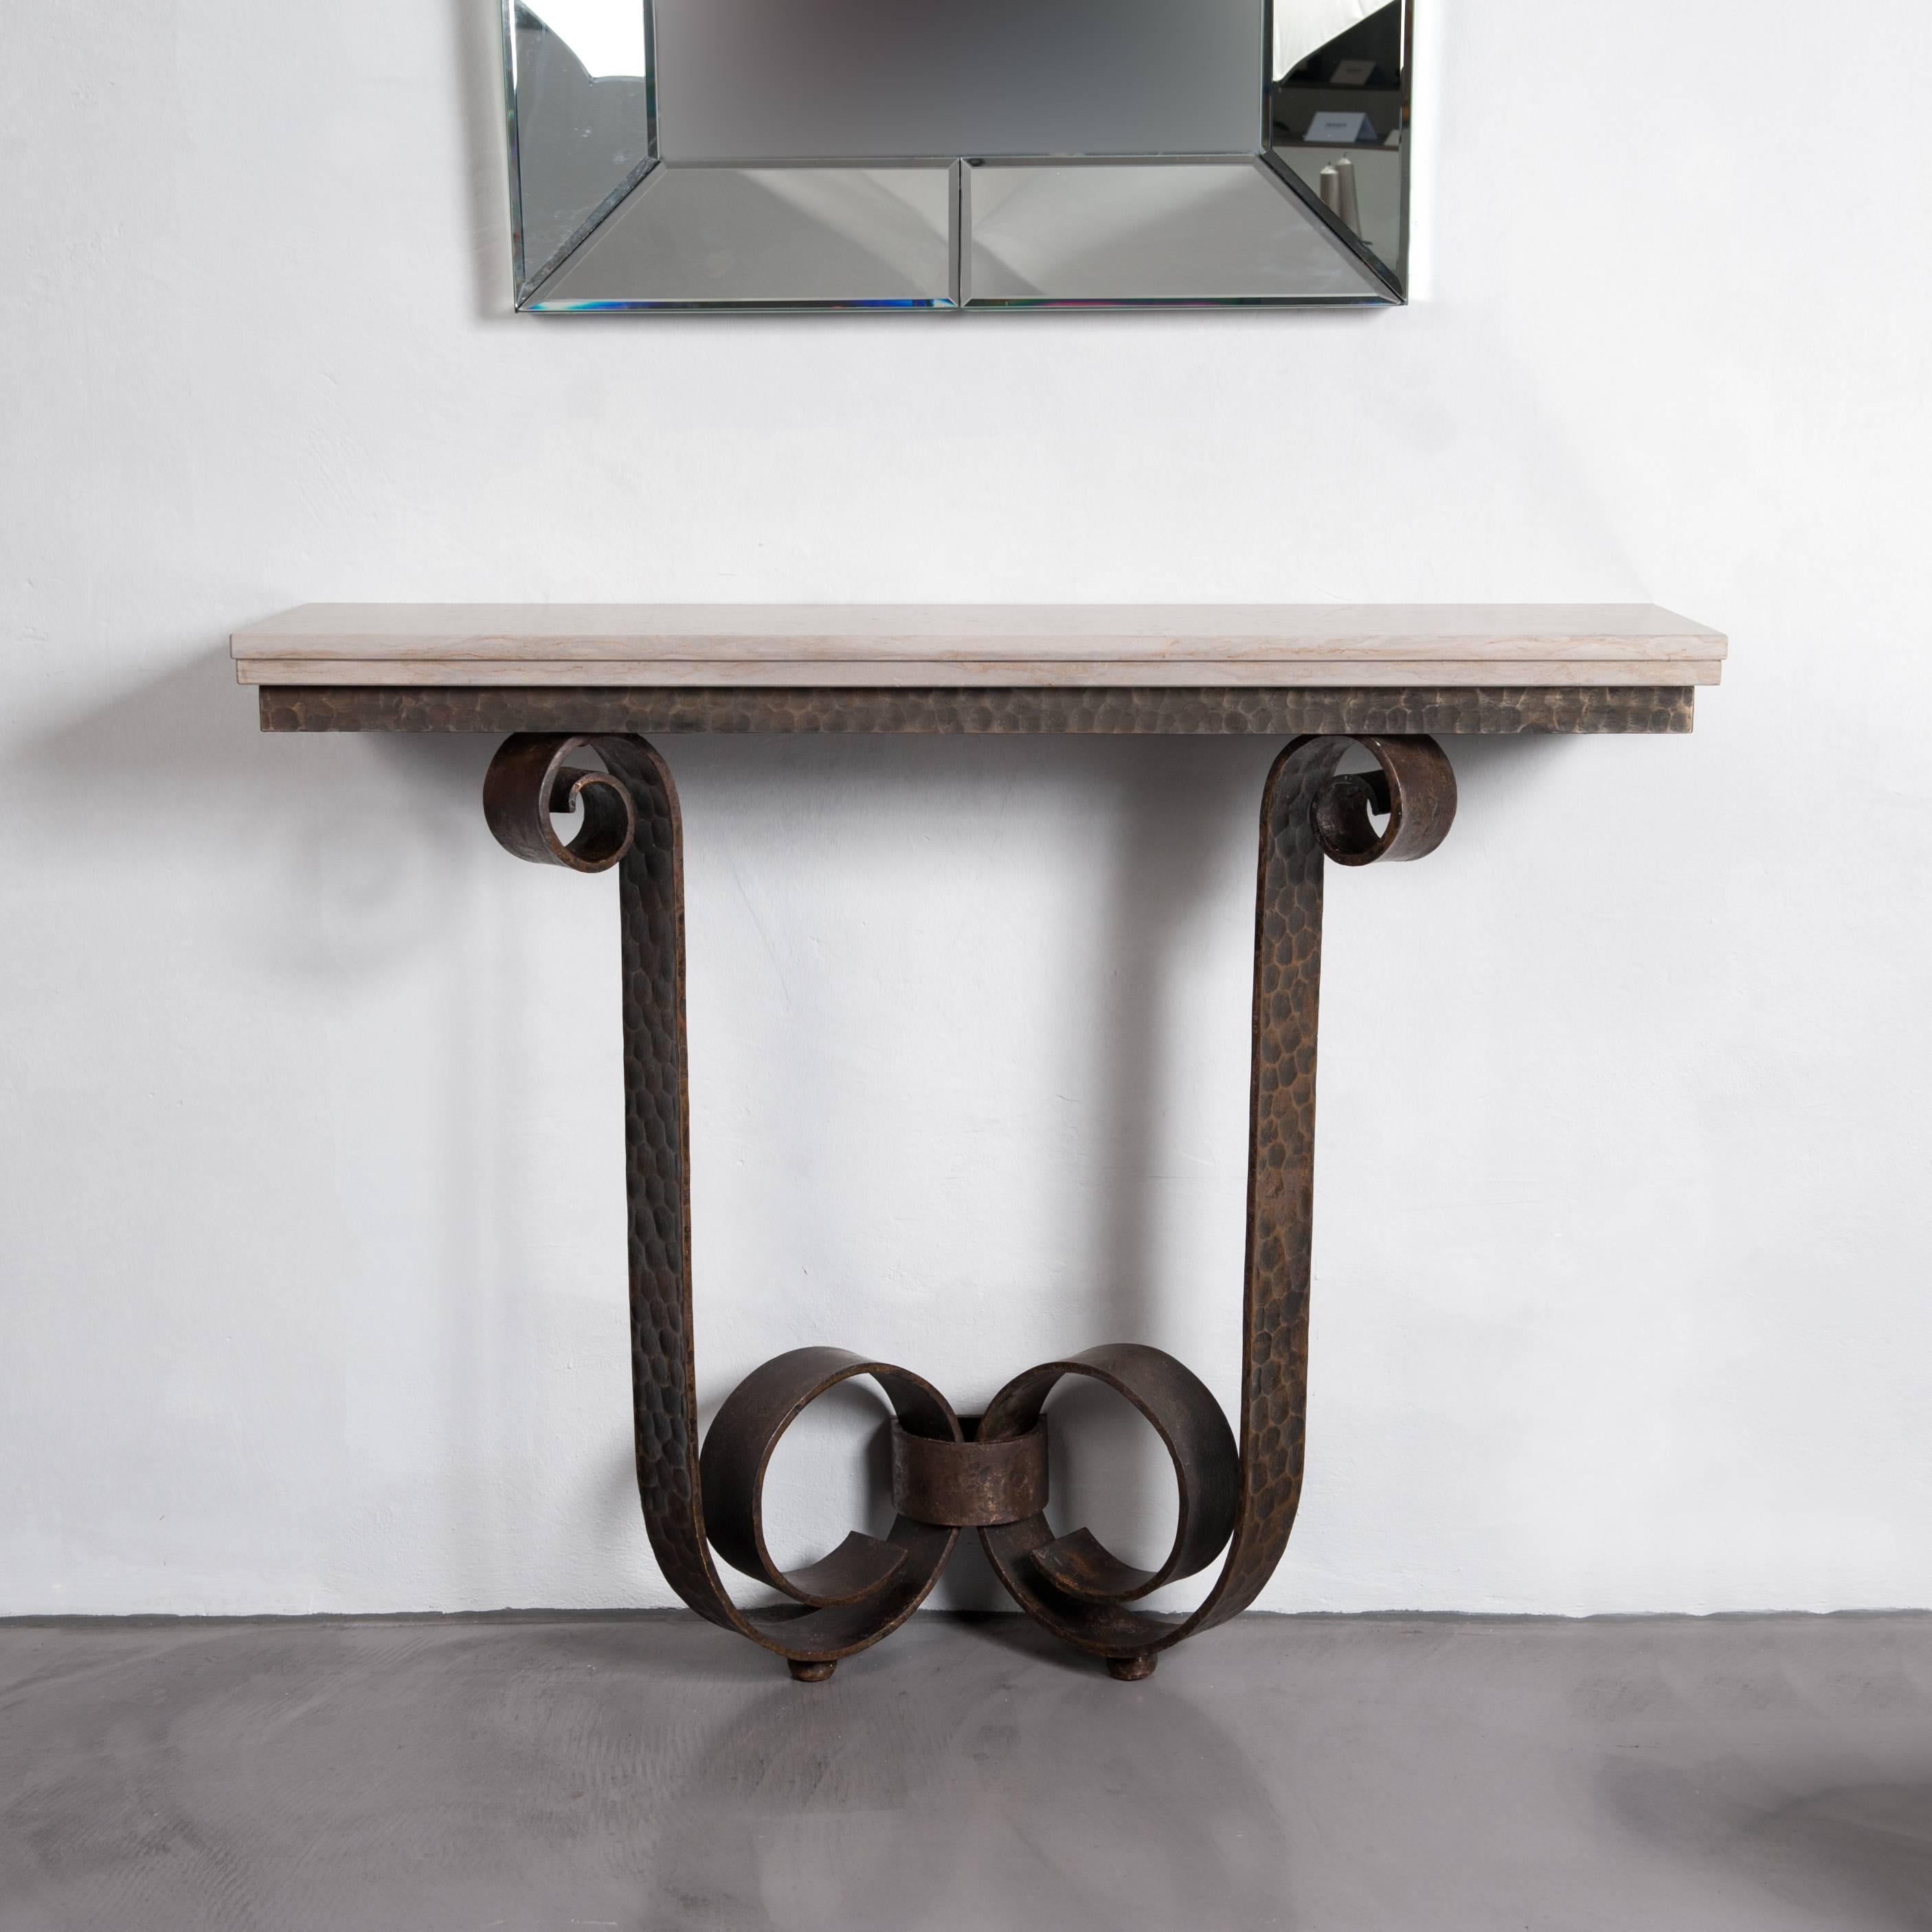 French Art Deco Wall Console Table, Solid Iron with Marble Top by V. Ducrot 1